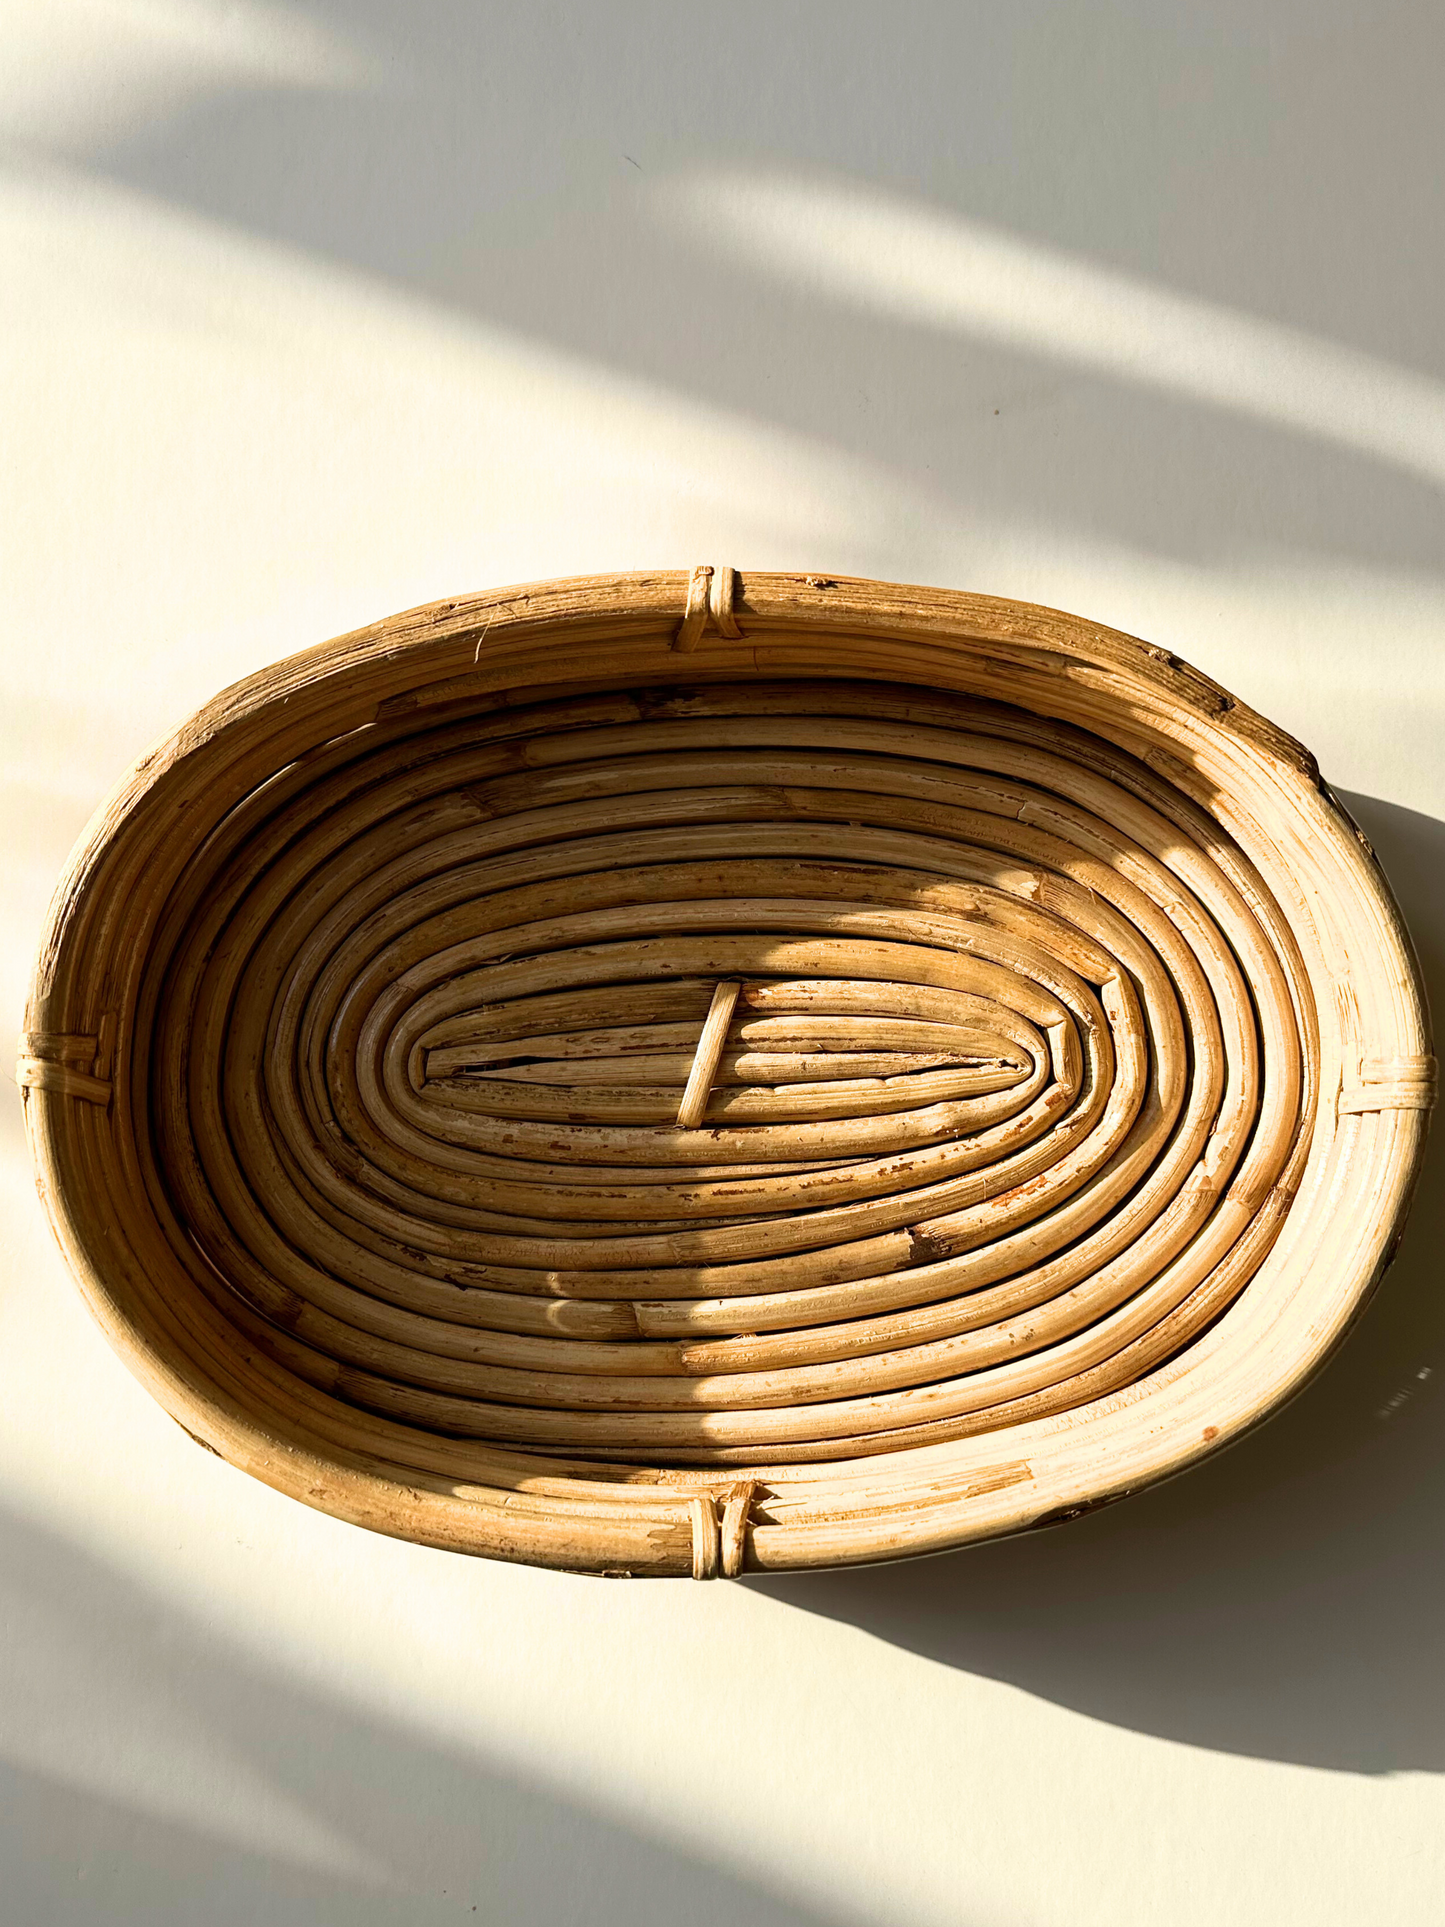 Coiled cane serving tray